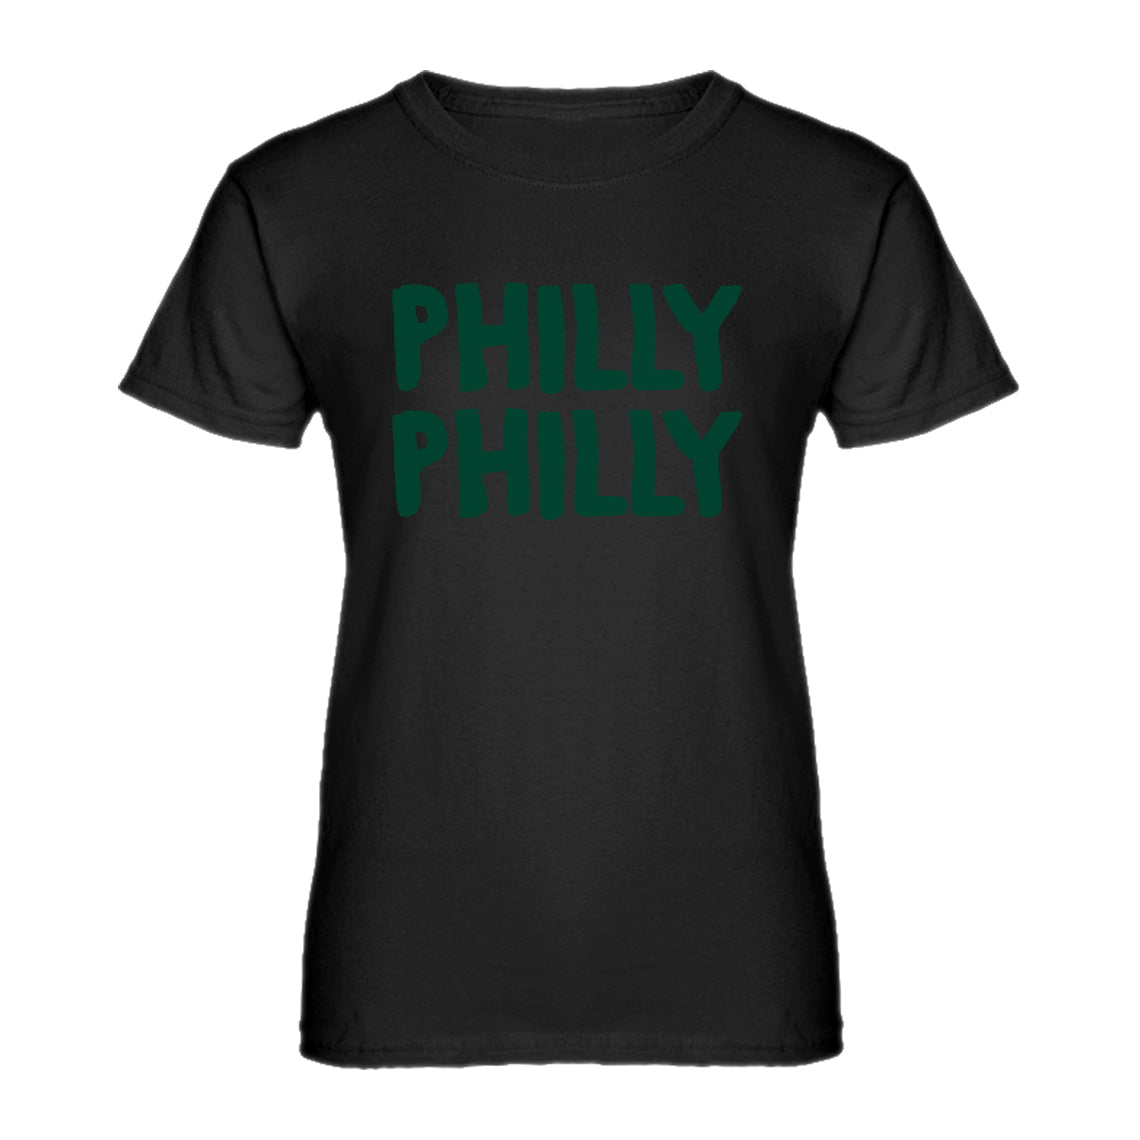 Womens Philly Philly Ladies' T-shirt